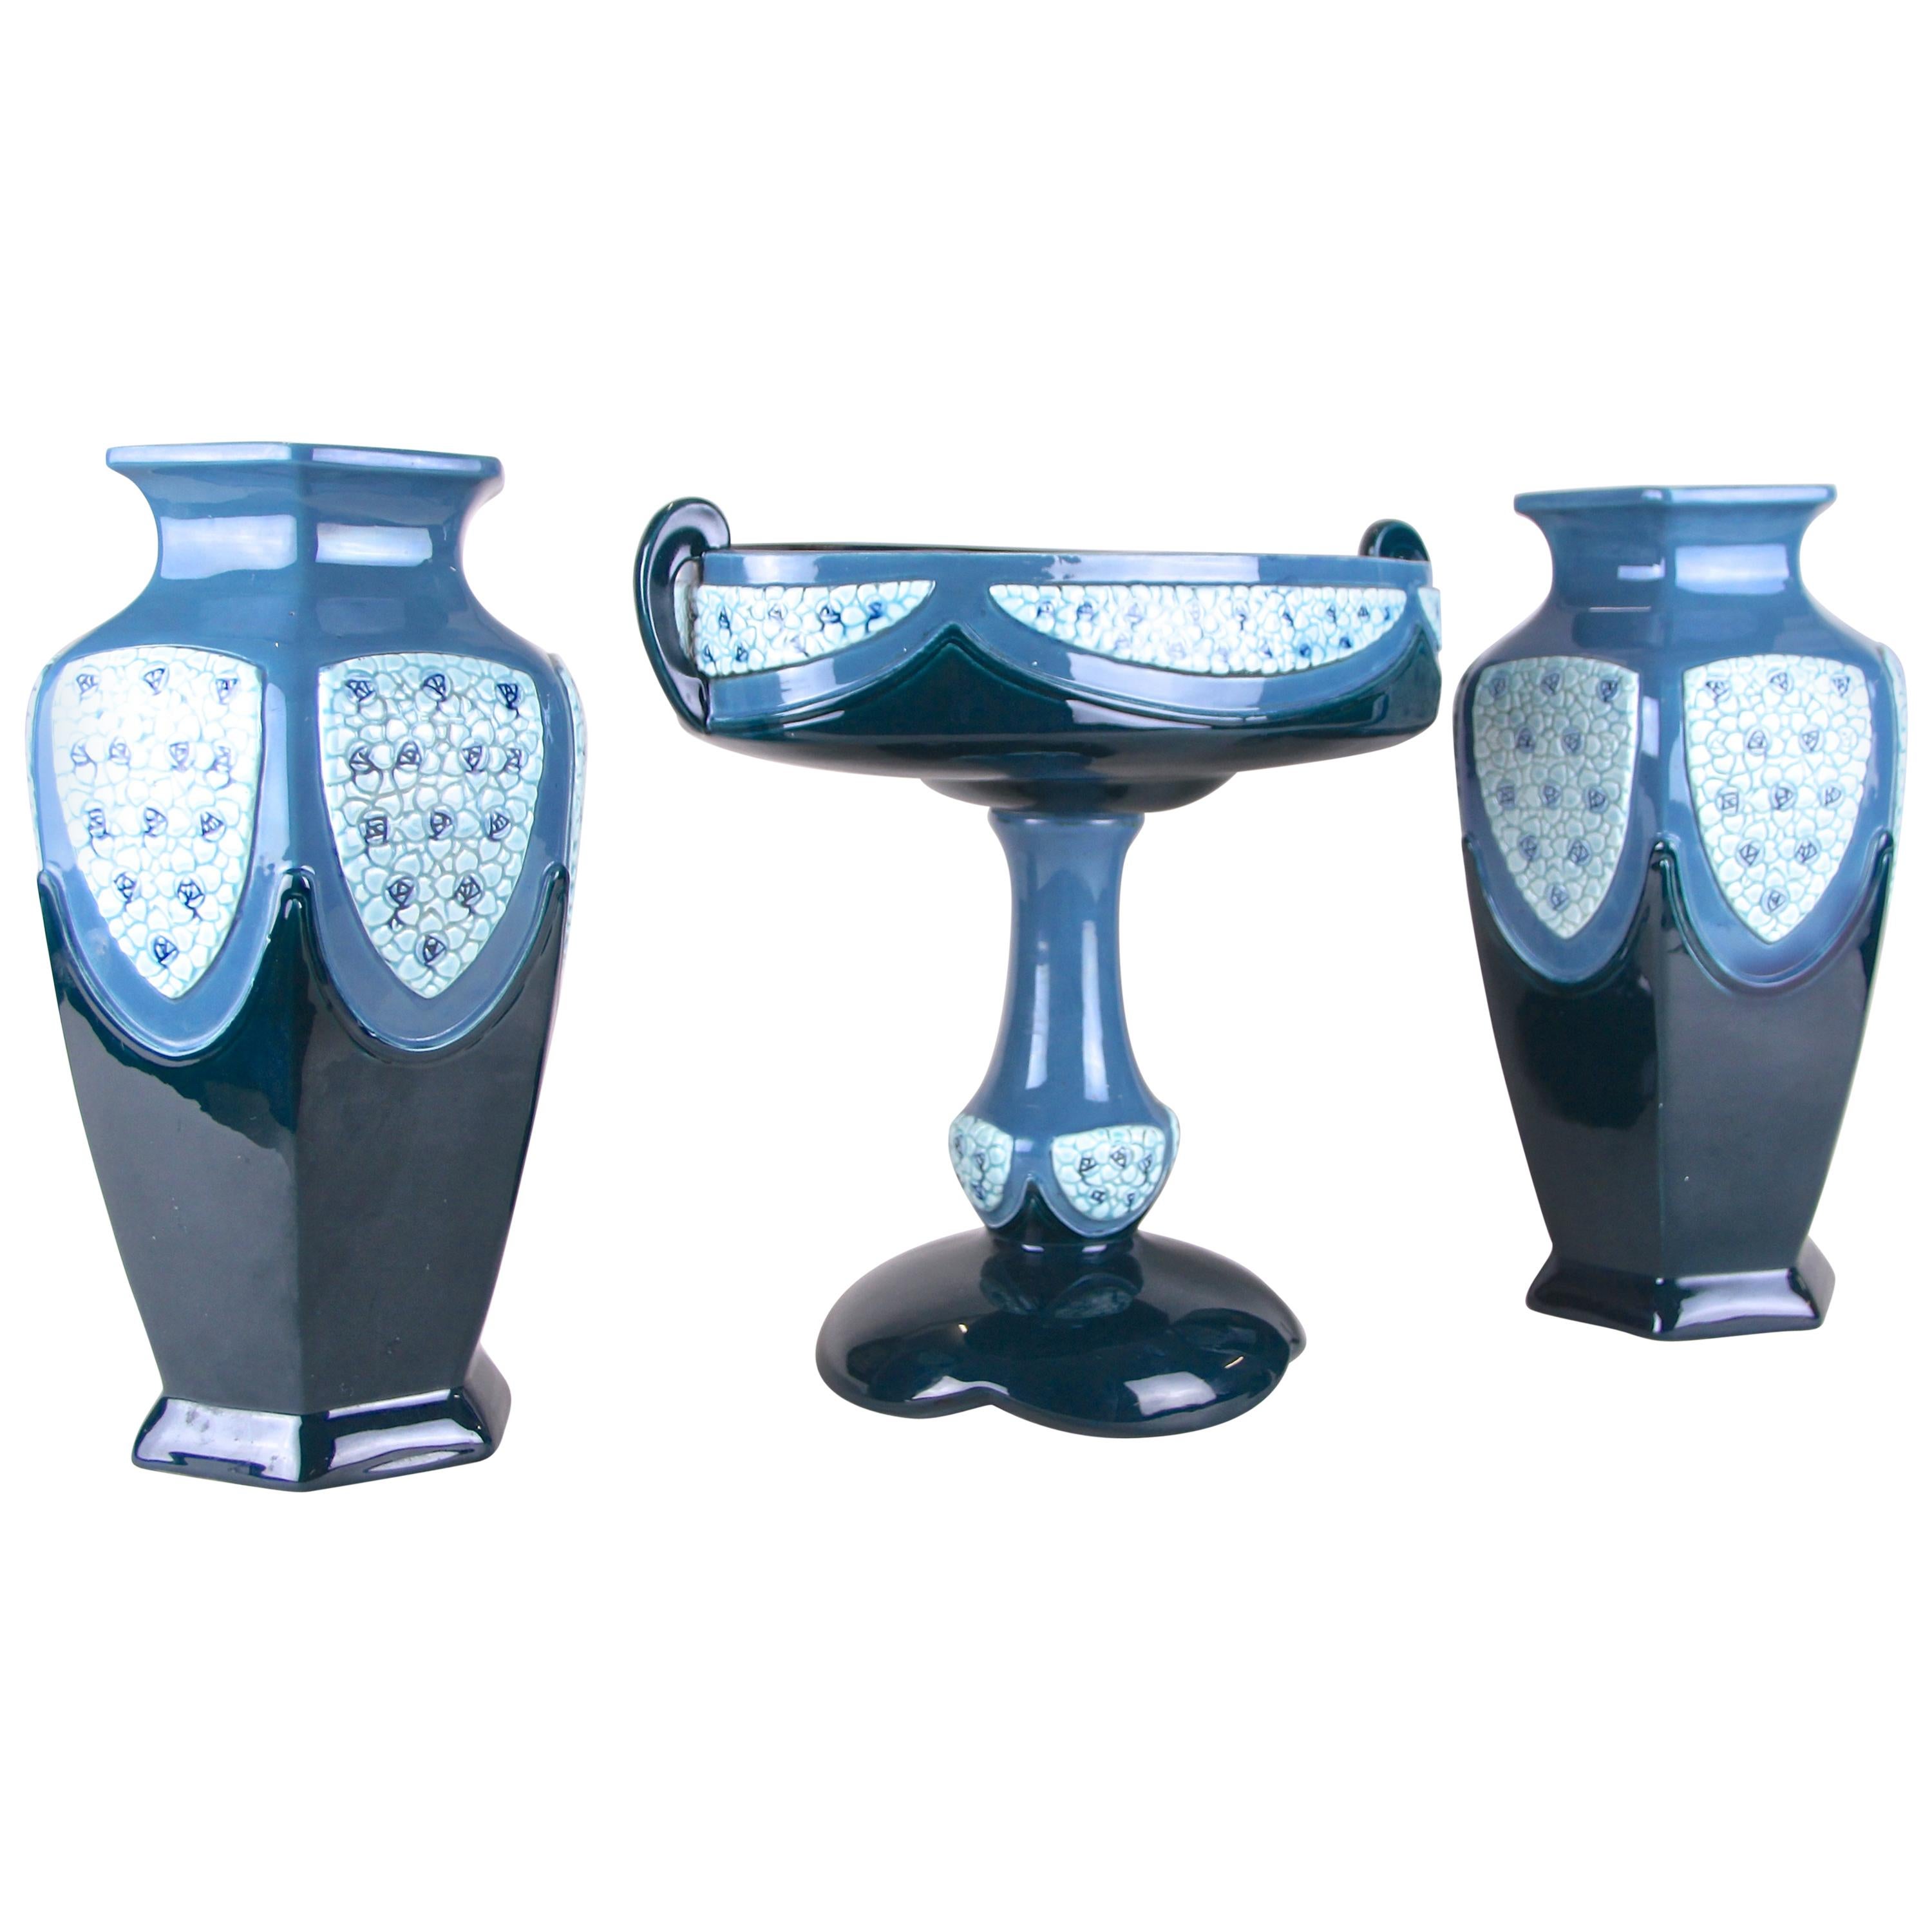 Remarkable Art Nouveau ceramic garniture/ set of vases made by the famous manufactory of Eichwald in Bohemia (former Austria), circa 1915. This representative ceramic set of three consists of two large beautiful designed vases and a suitable